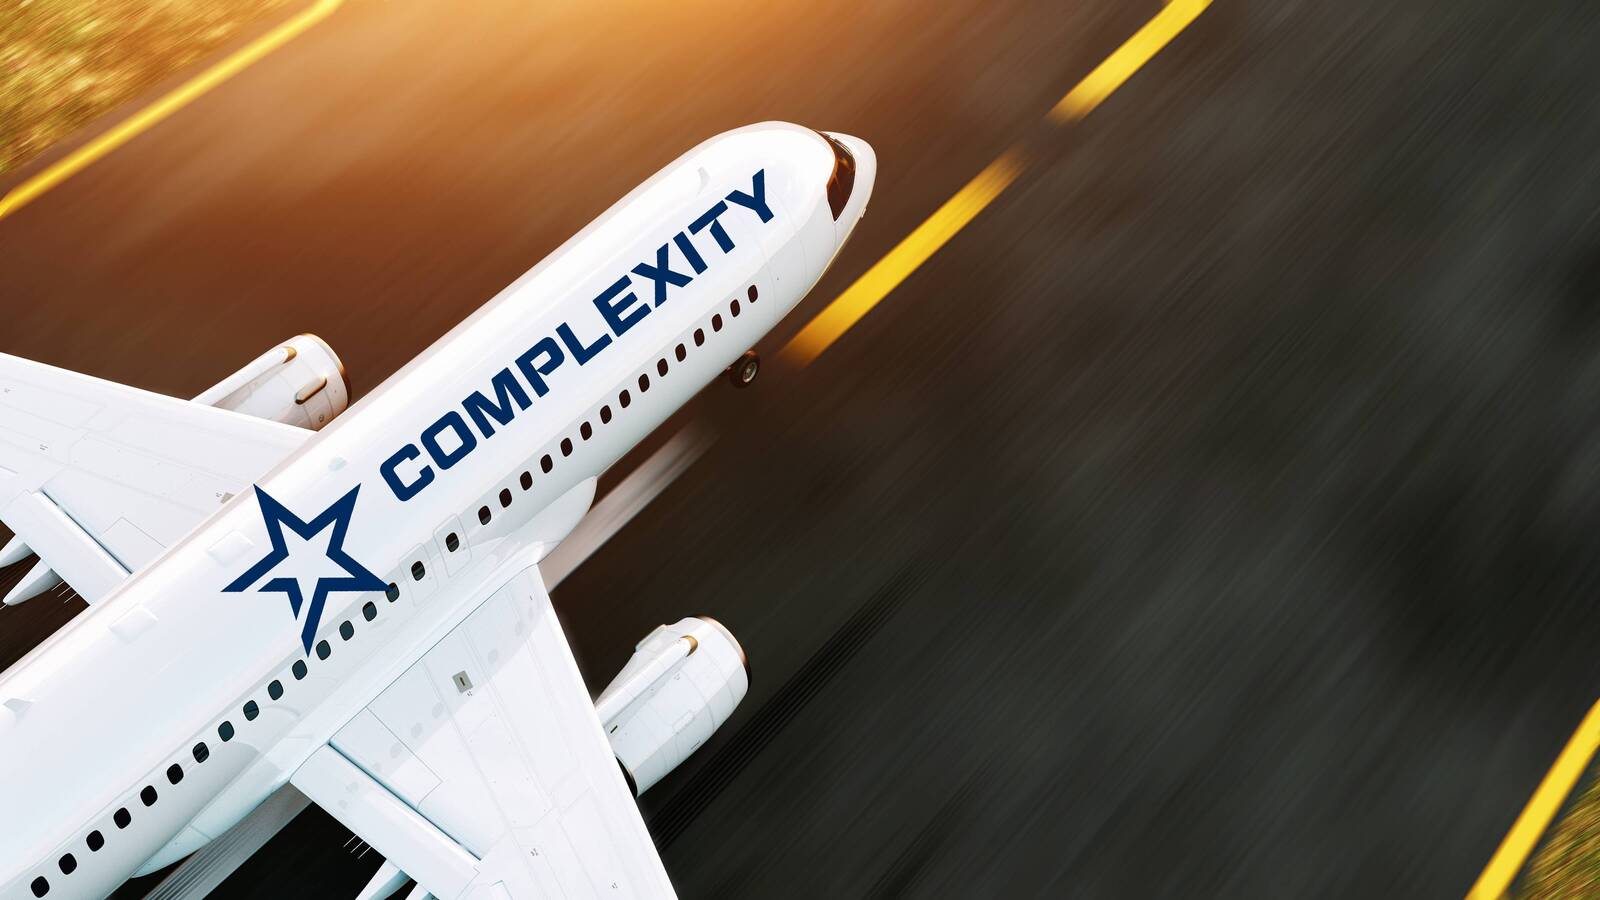 Complexity logo on airplane